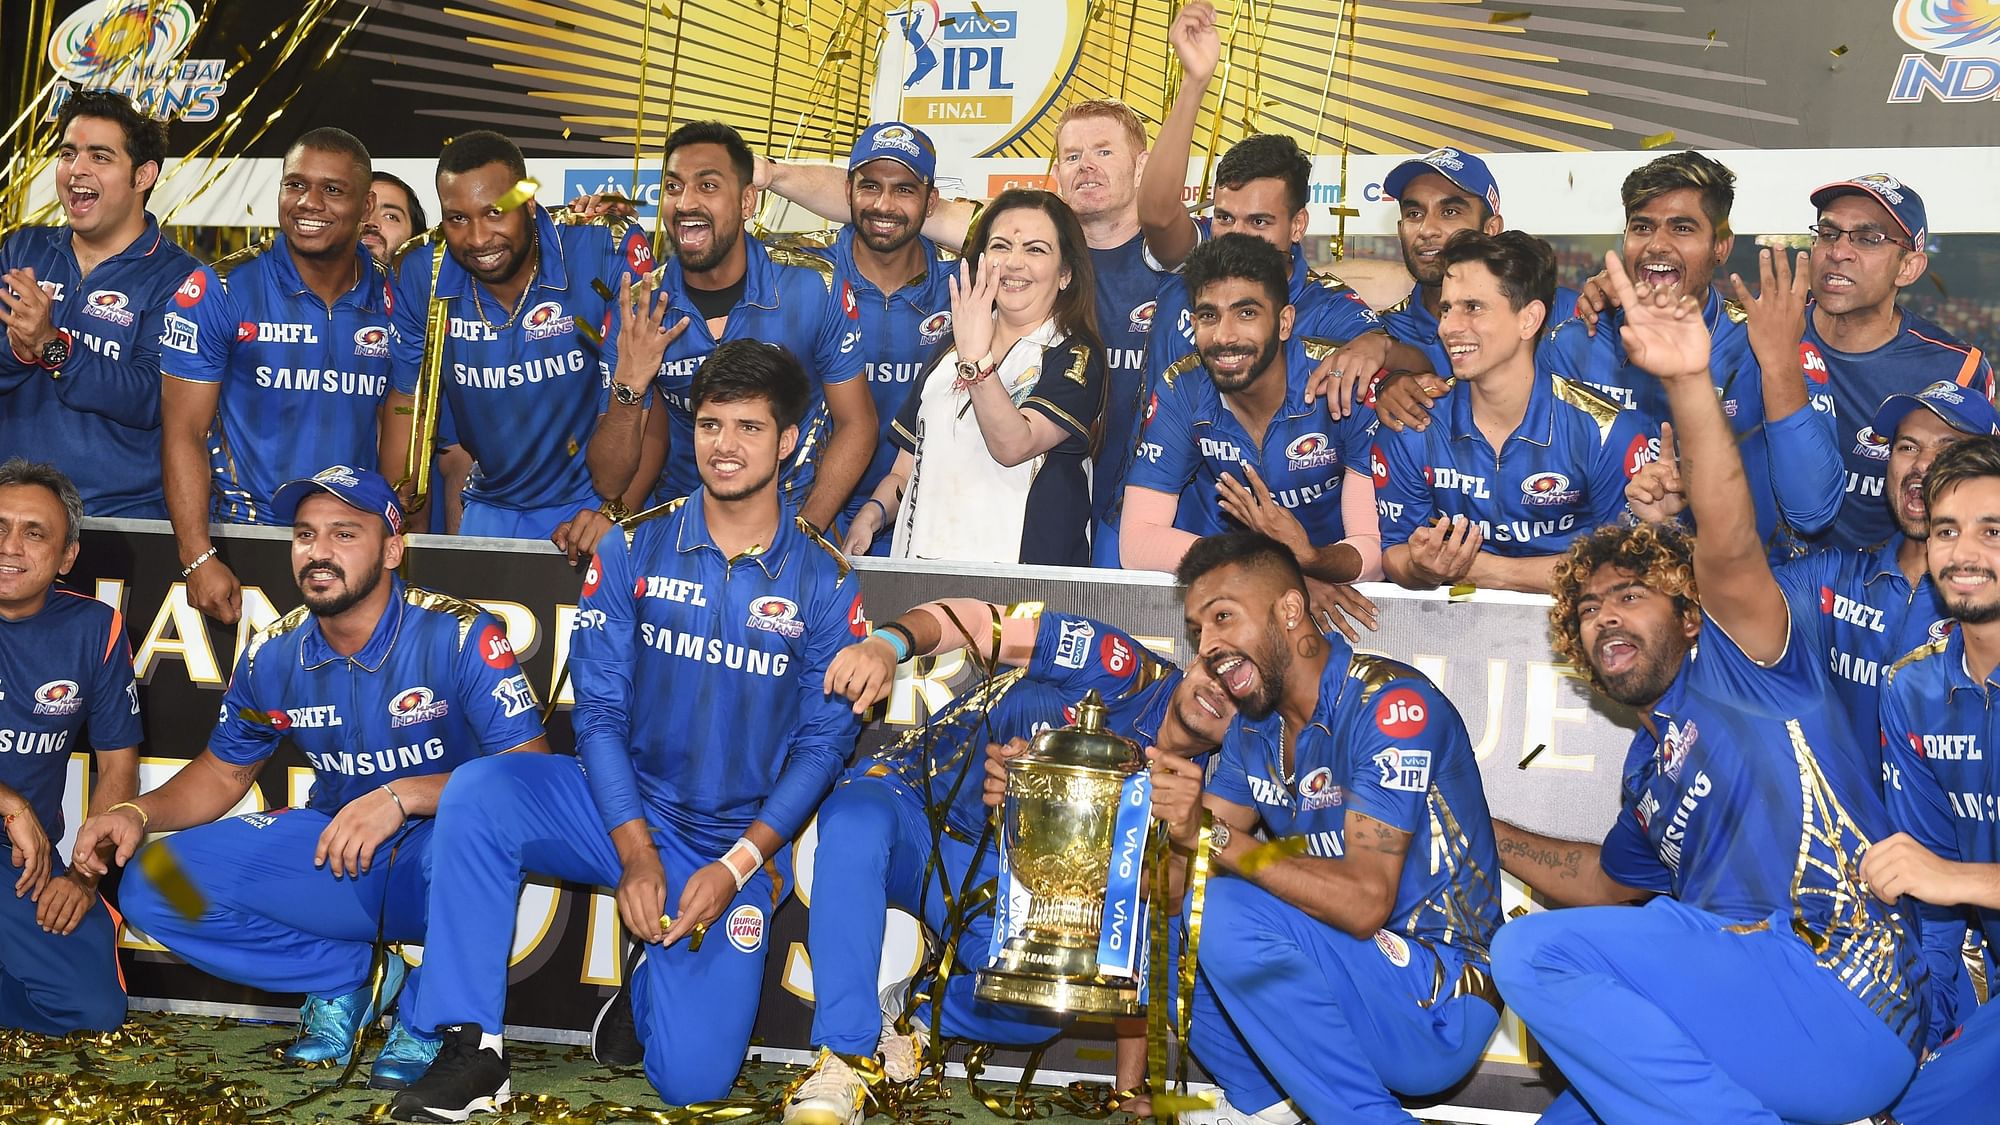 A look at some of the big decisions made in the IPL General Council meeting on Tuesday in Mumbai.